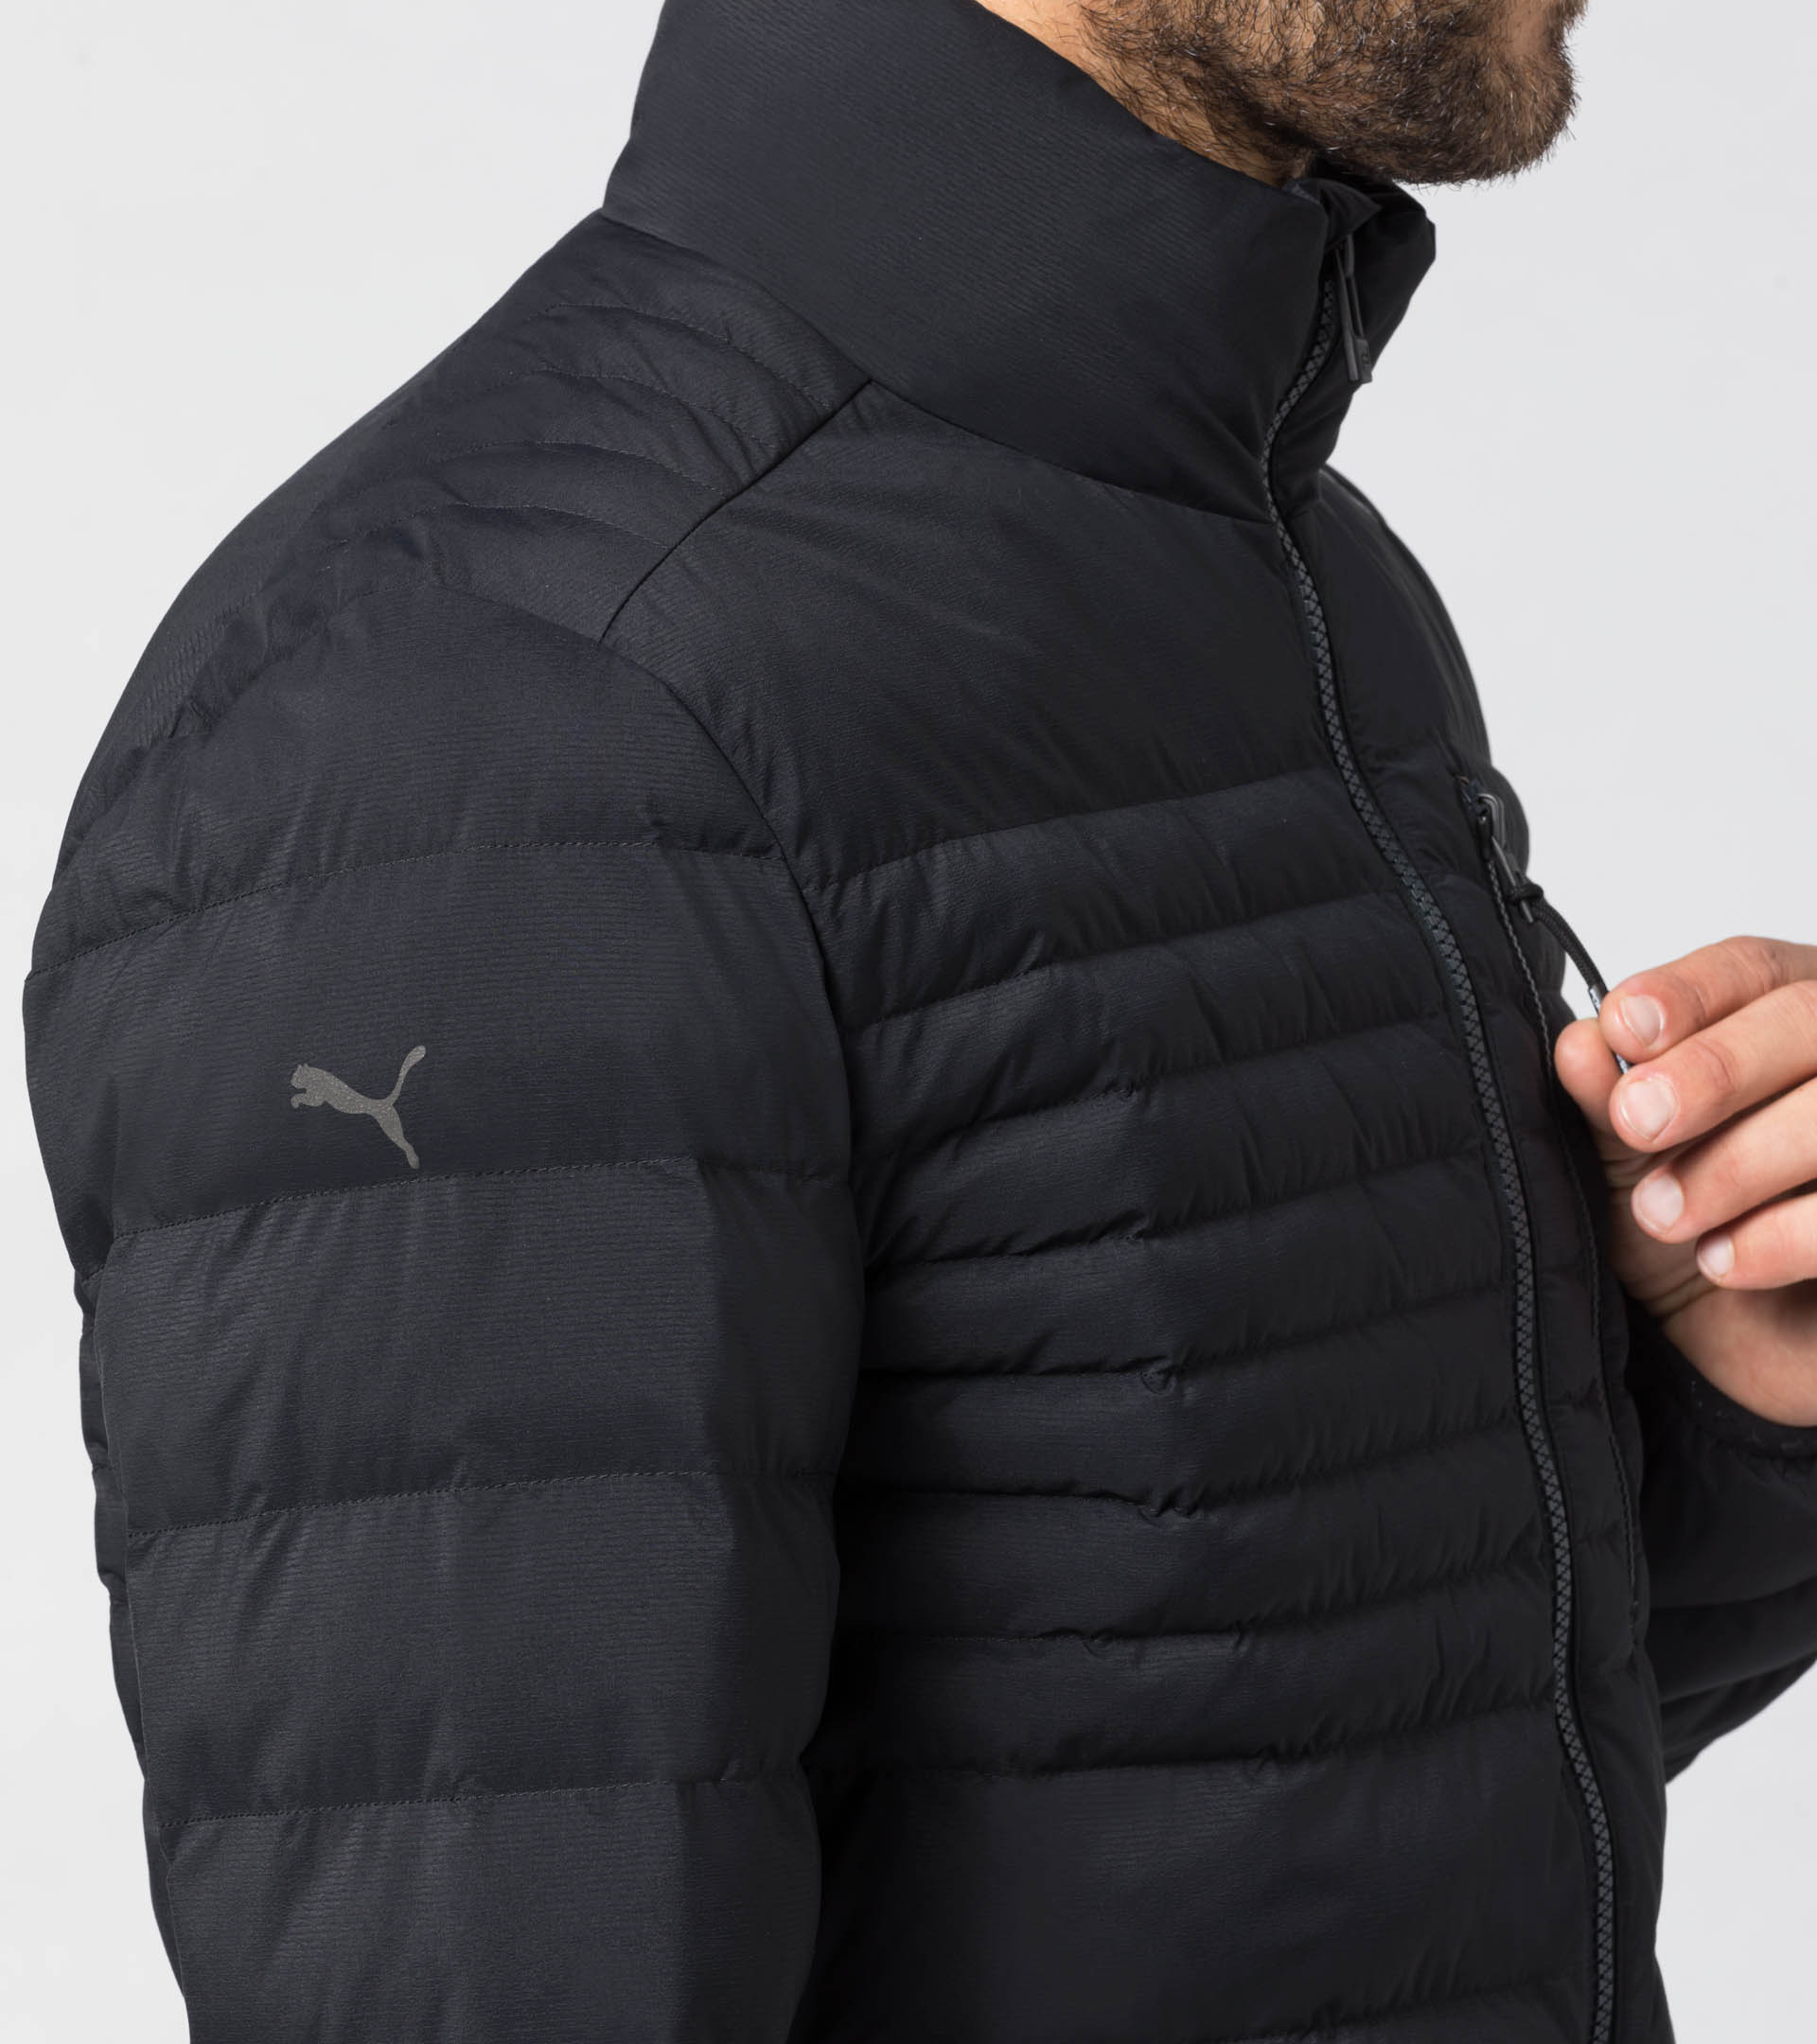 Light Packable Jacket - Luxury Functional Jackets for Men 